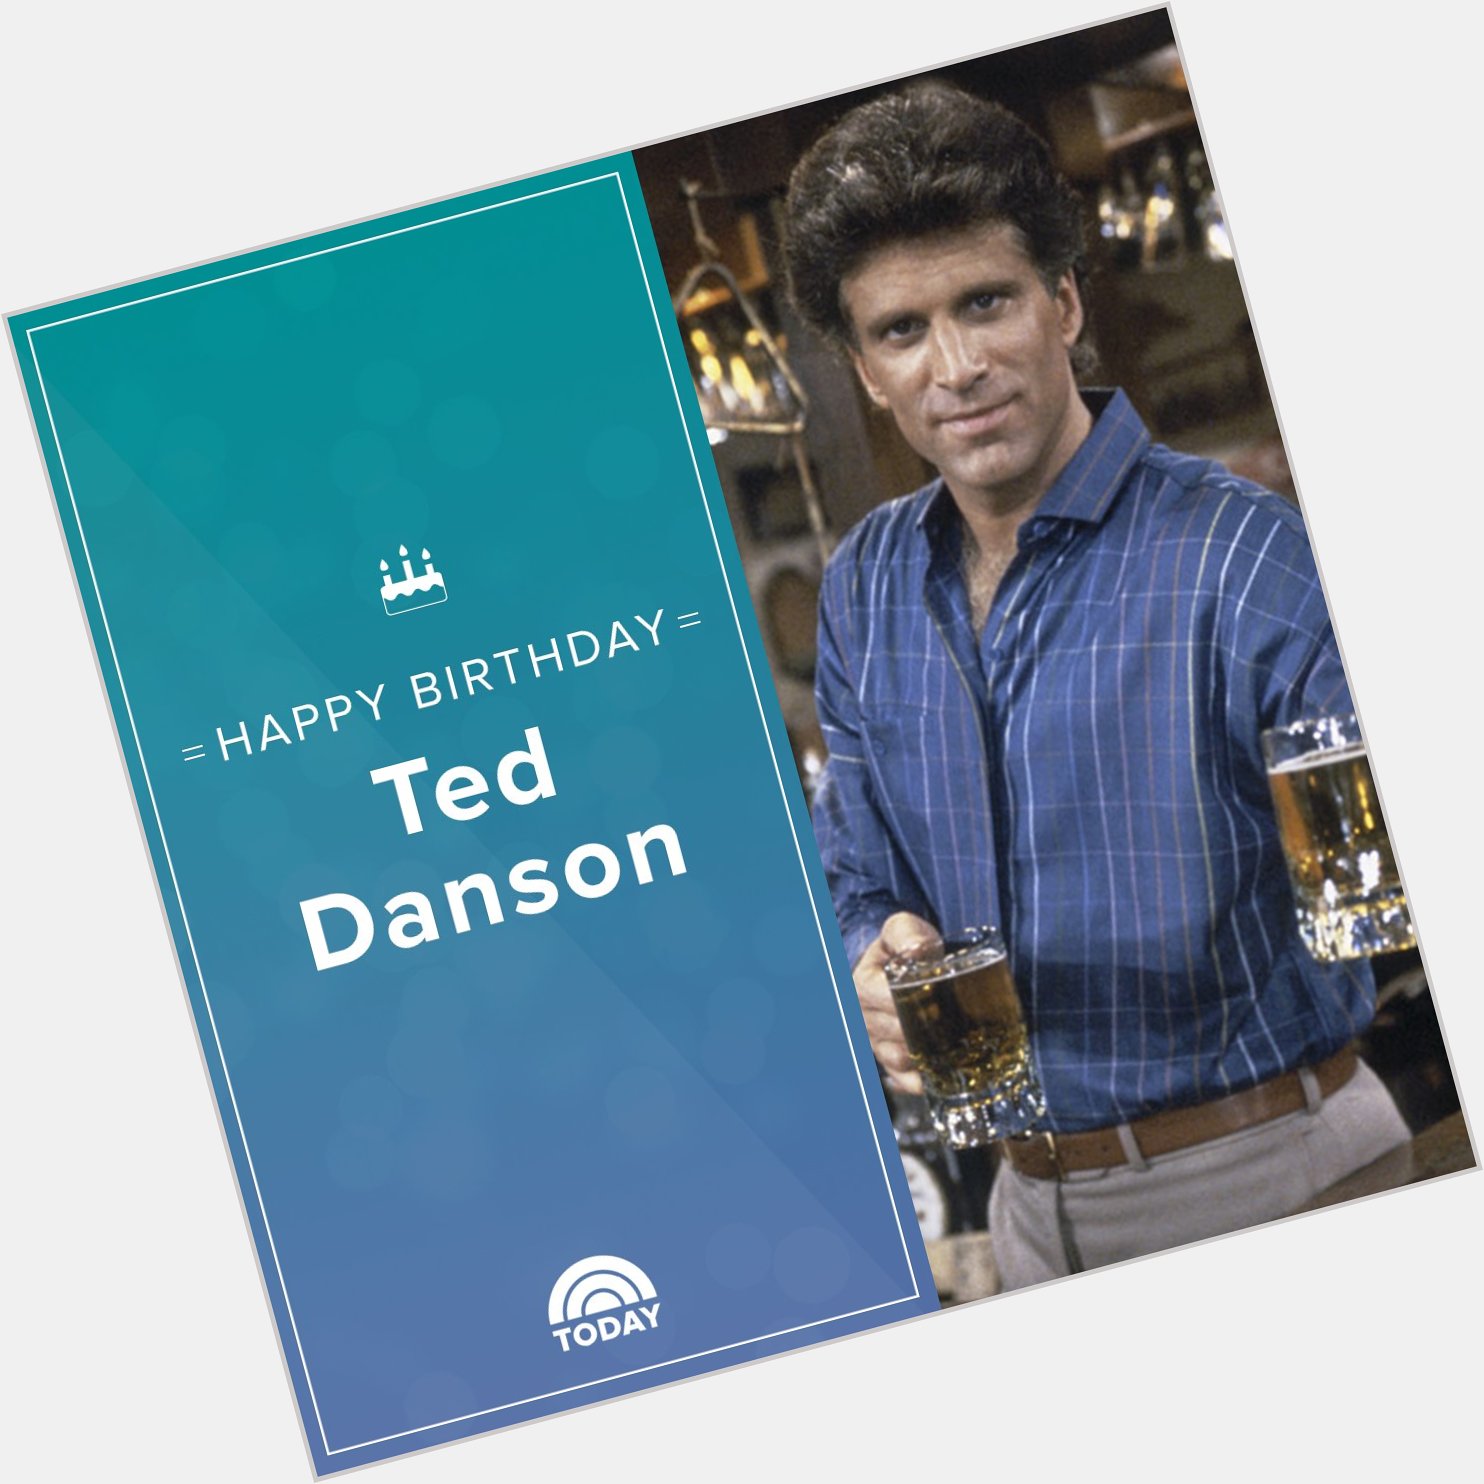 Cheers and happy birthday, Ted Danson!  